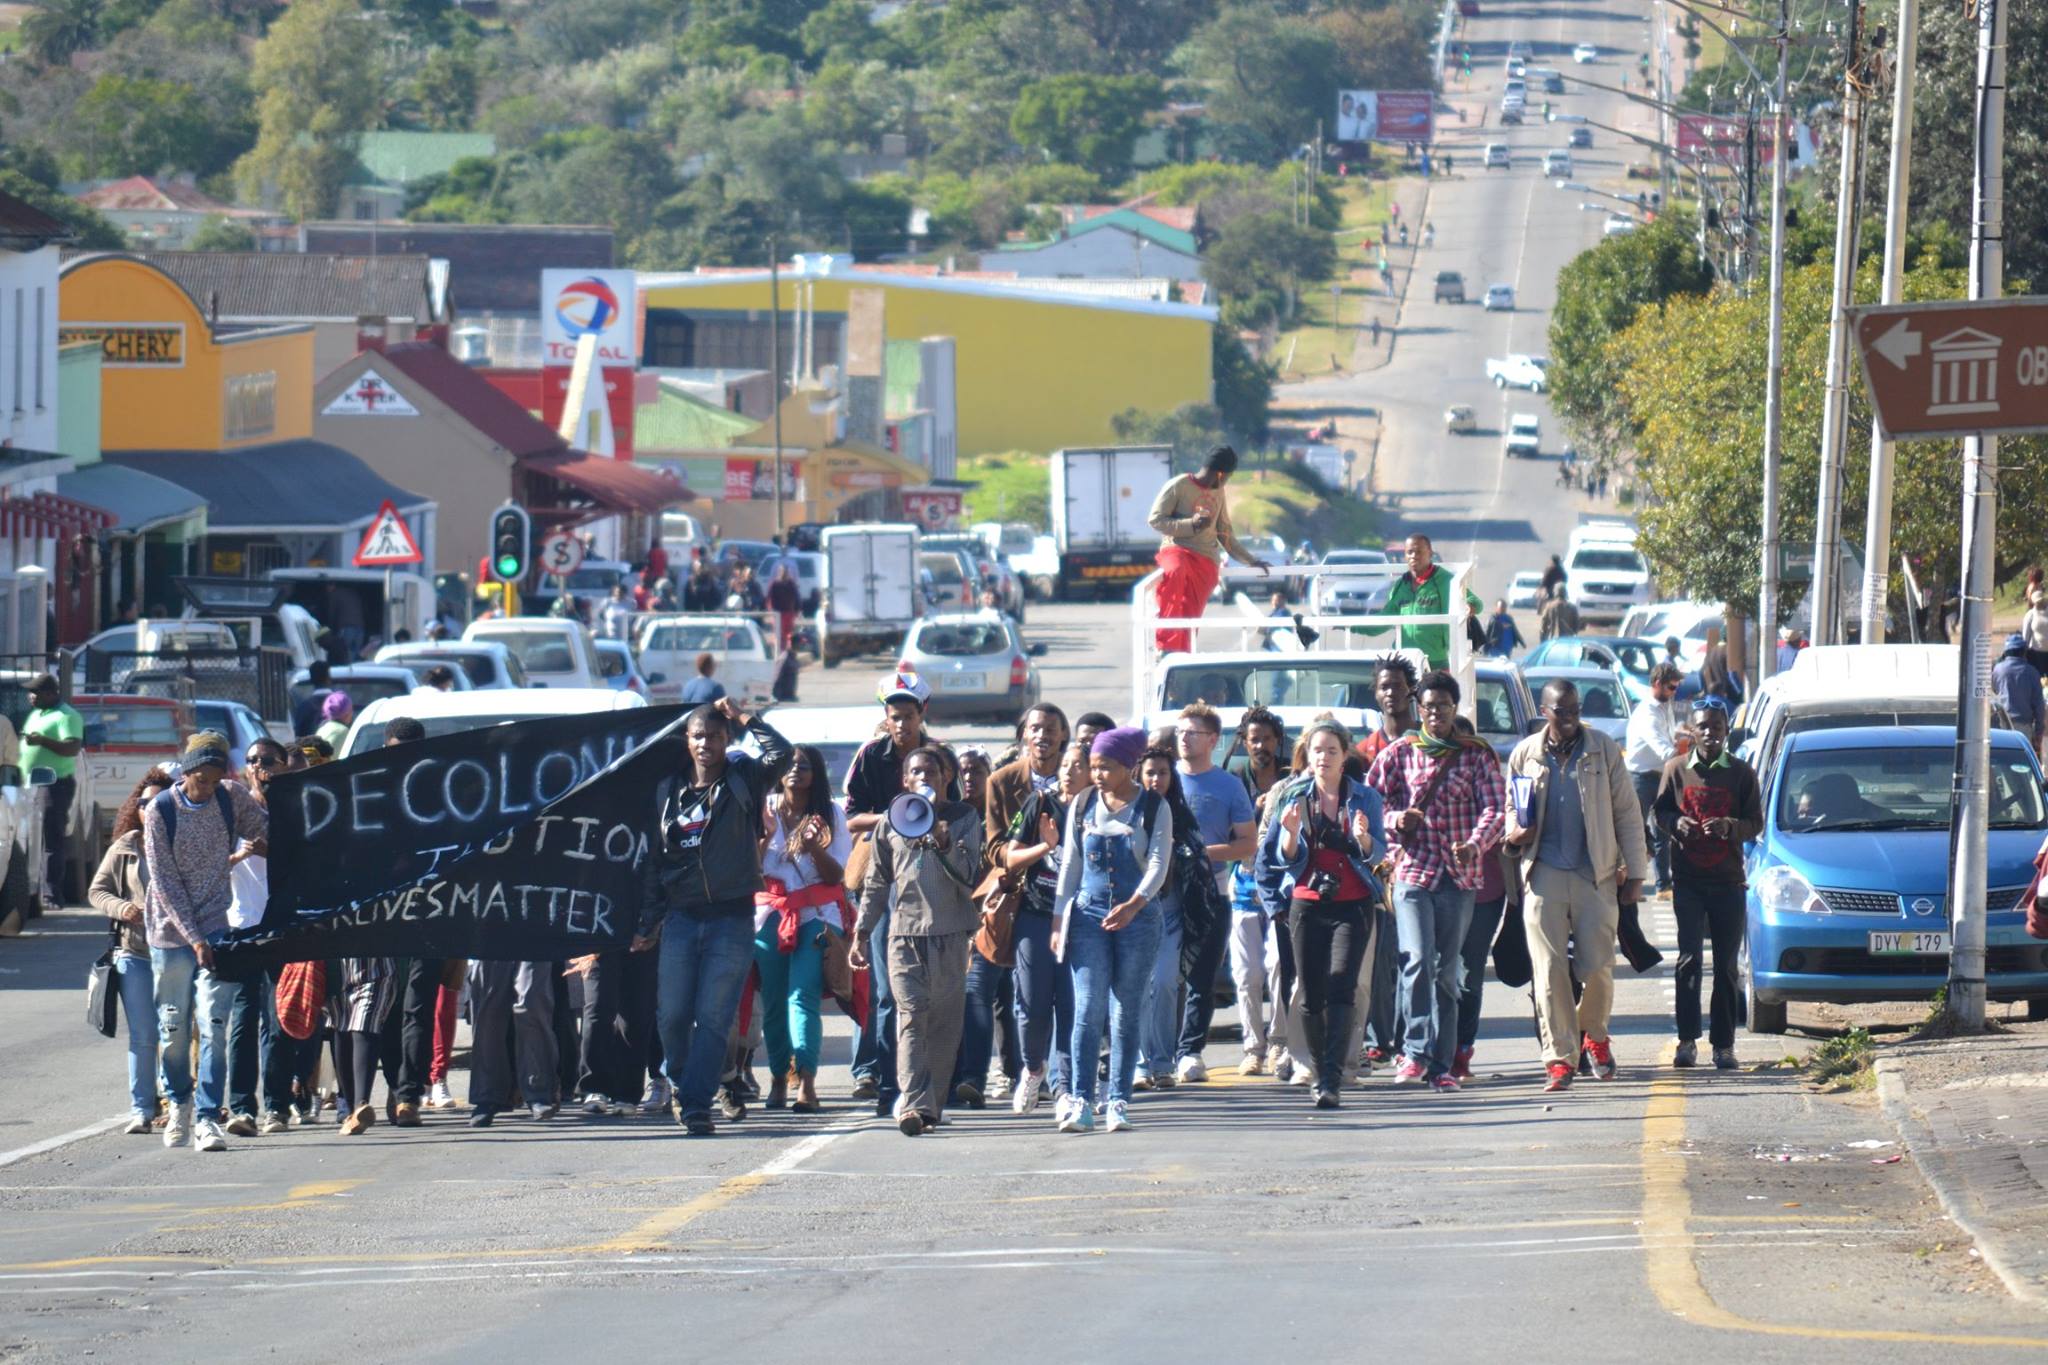 BSM protests in Grahamstown a few weeks ago image by Xolile Madinda